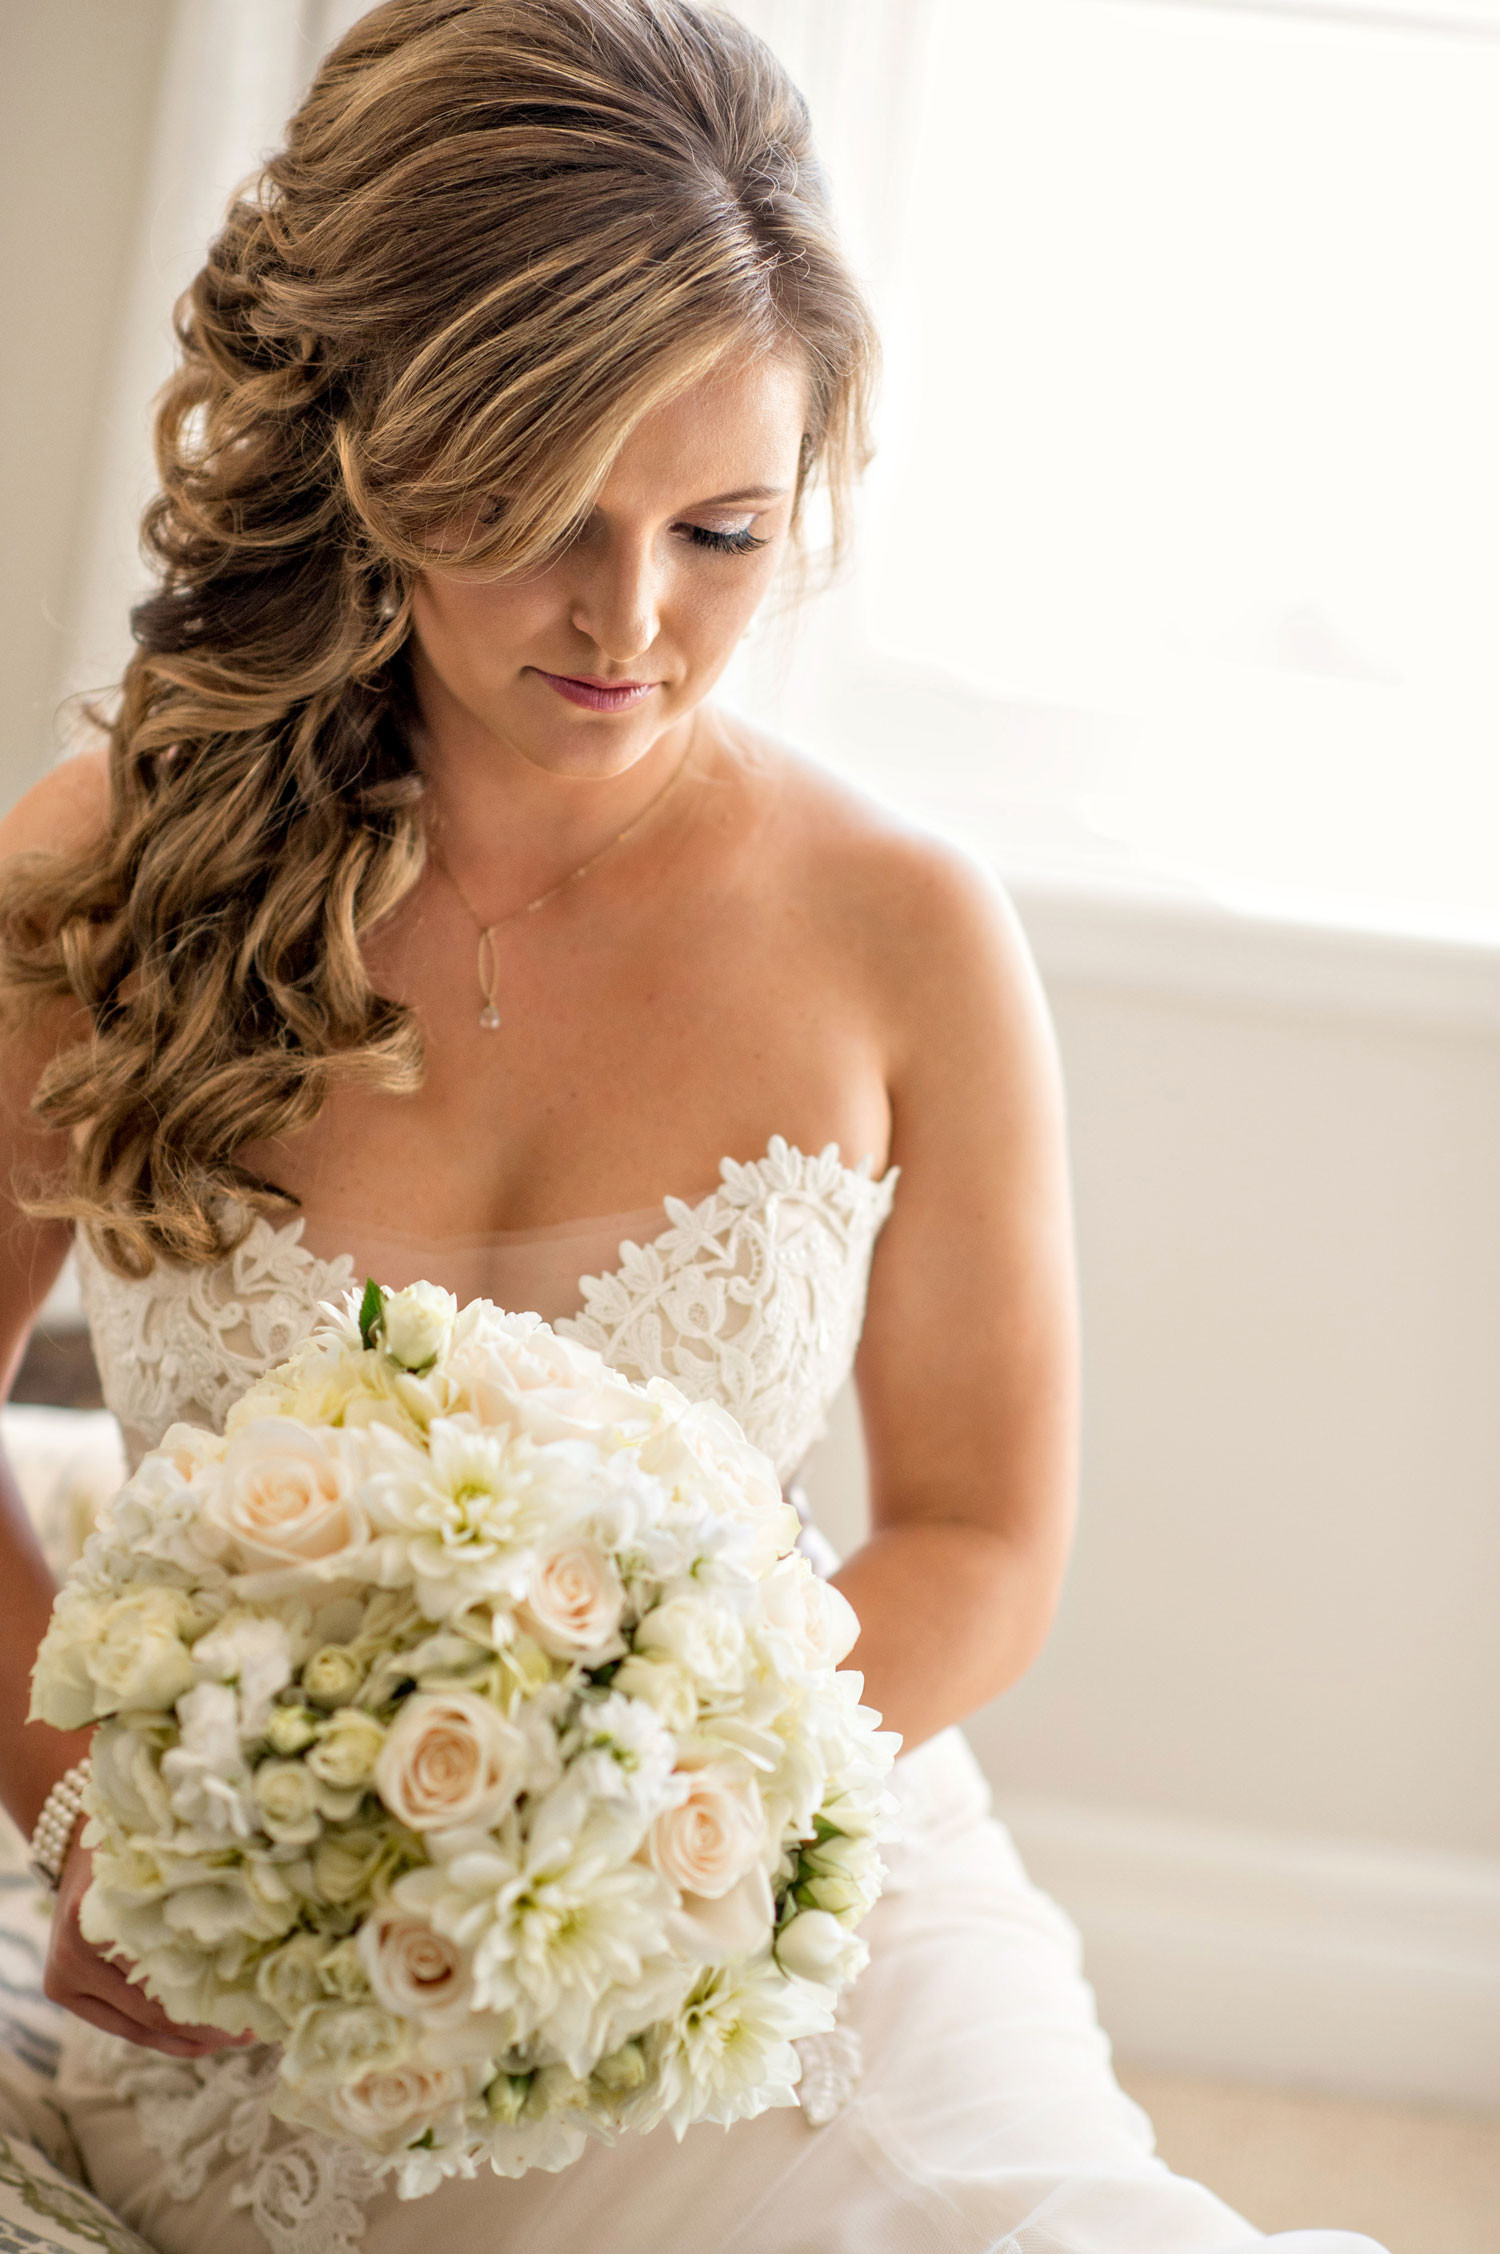 Side Wedding Hairstyles Long Hair
 Wedding Hair Pretty Hairstyles for Brides with Long Hair